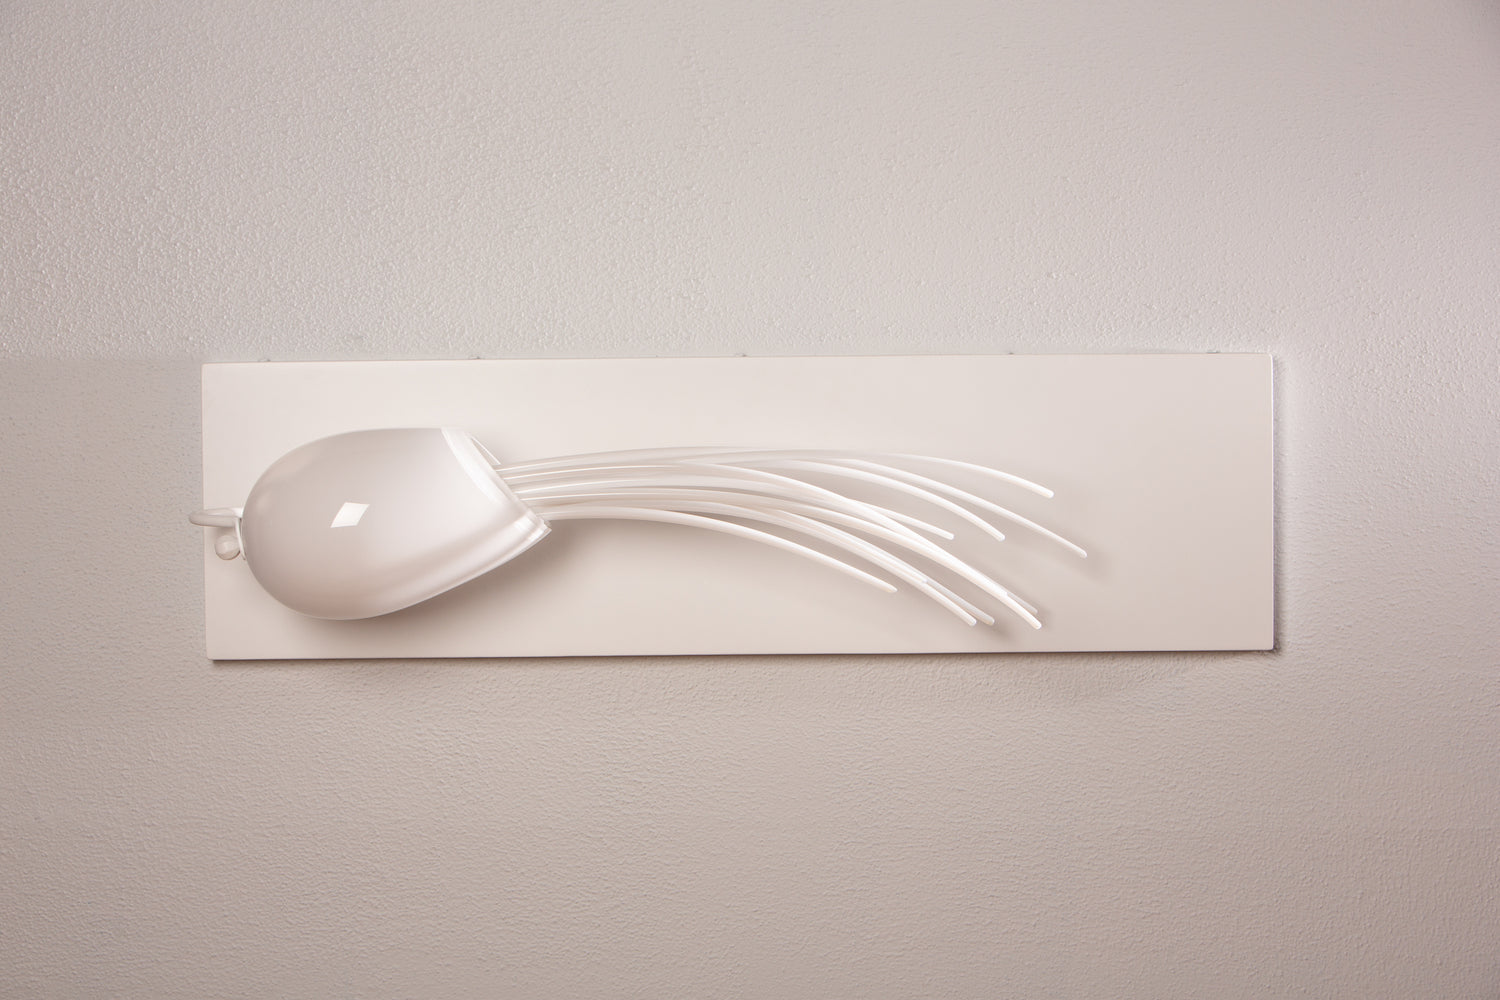 A white glass sculpture with tendrils hangs on a white wall